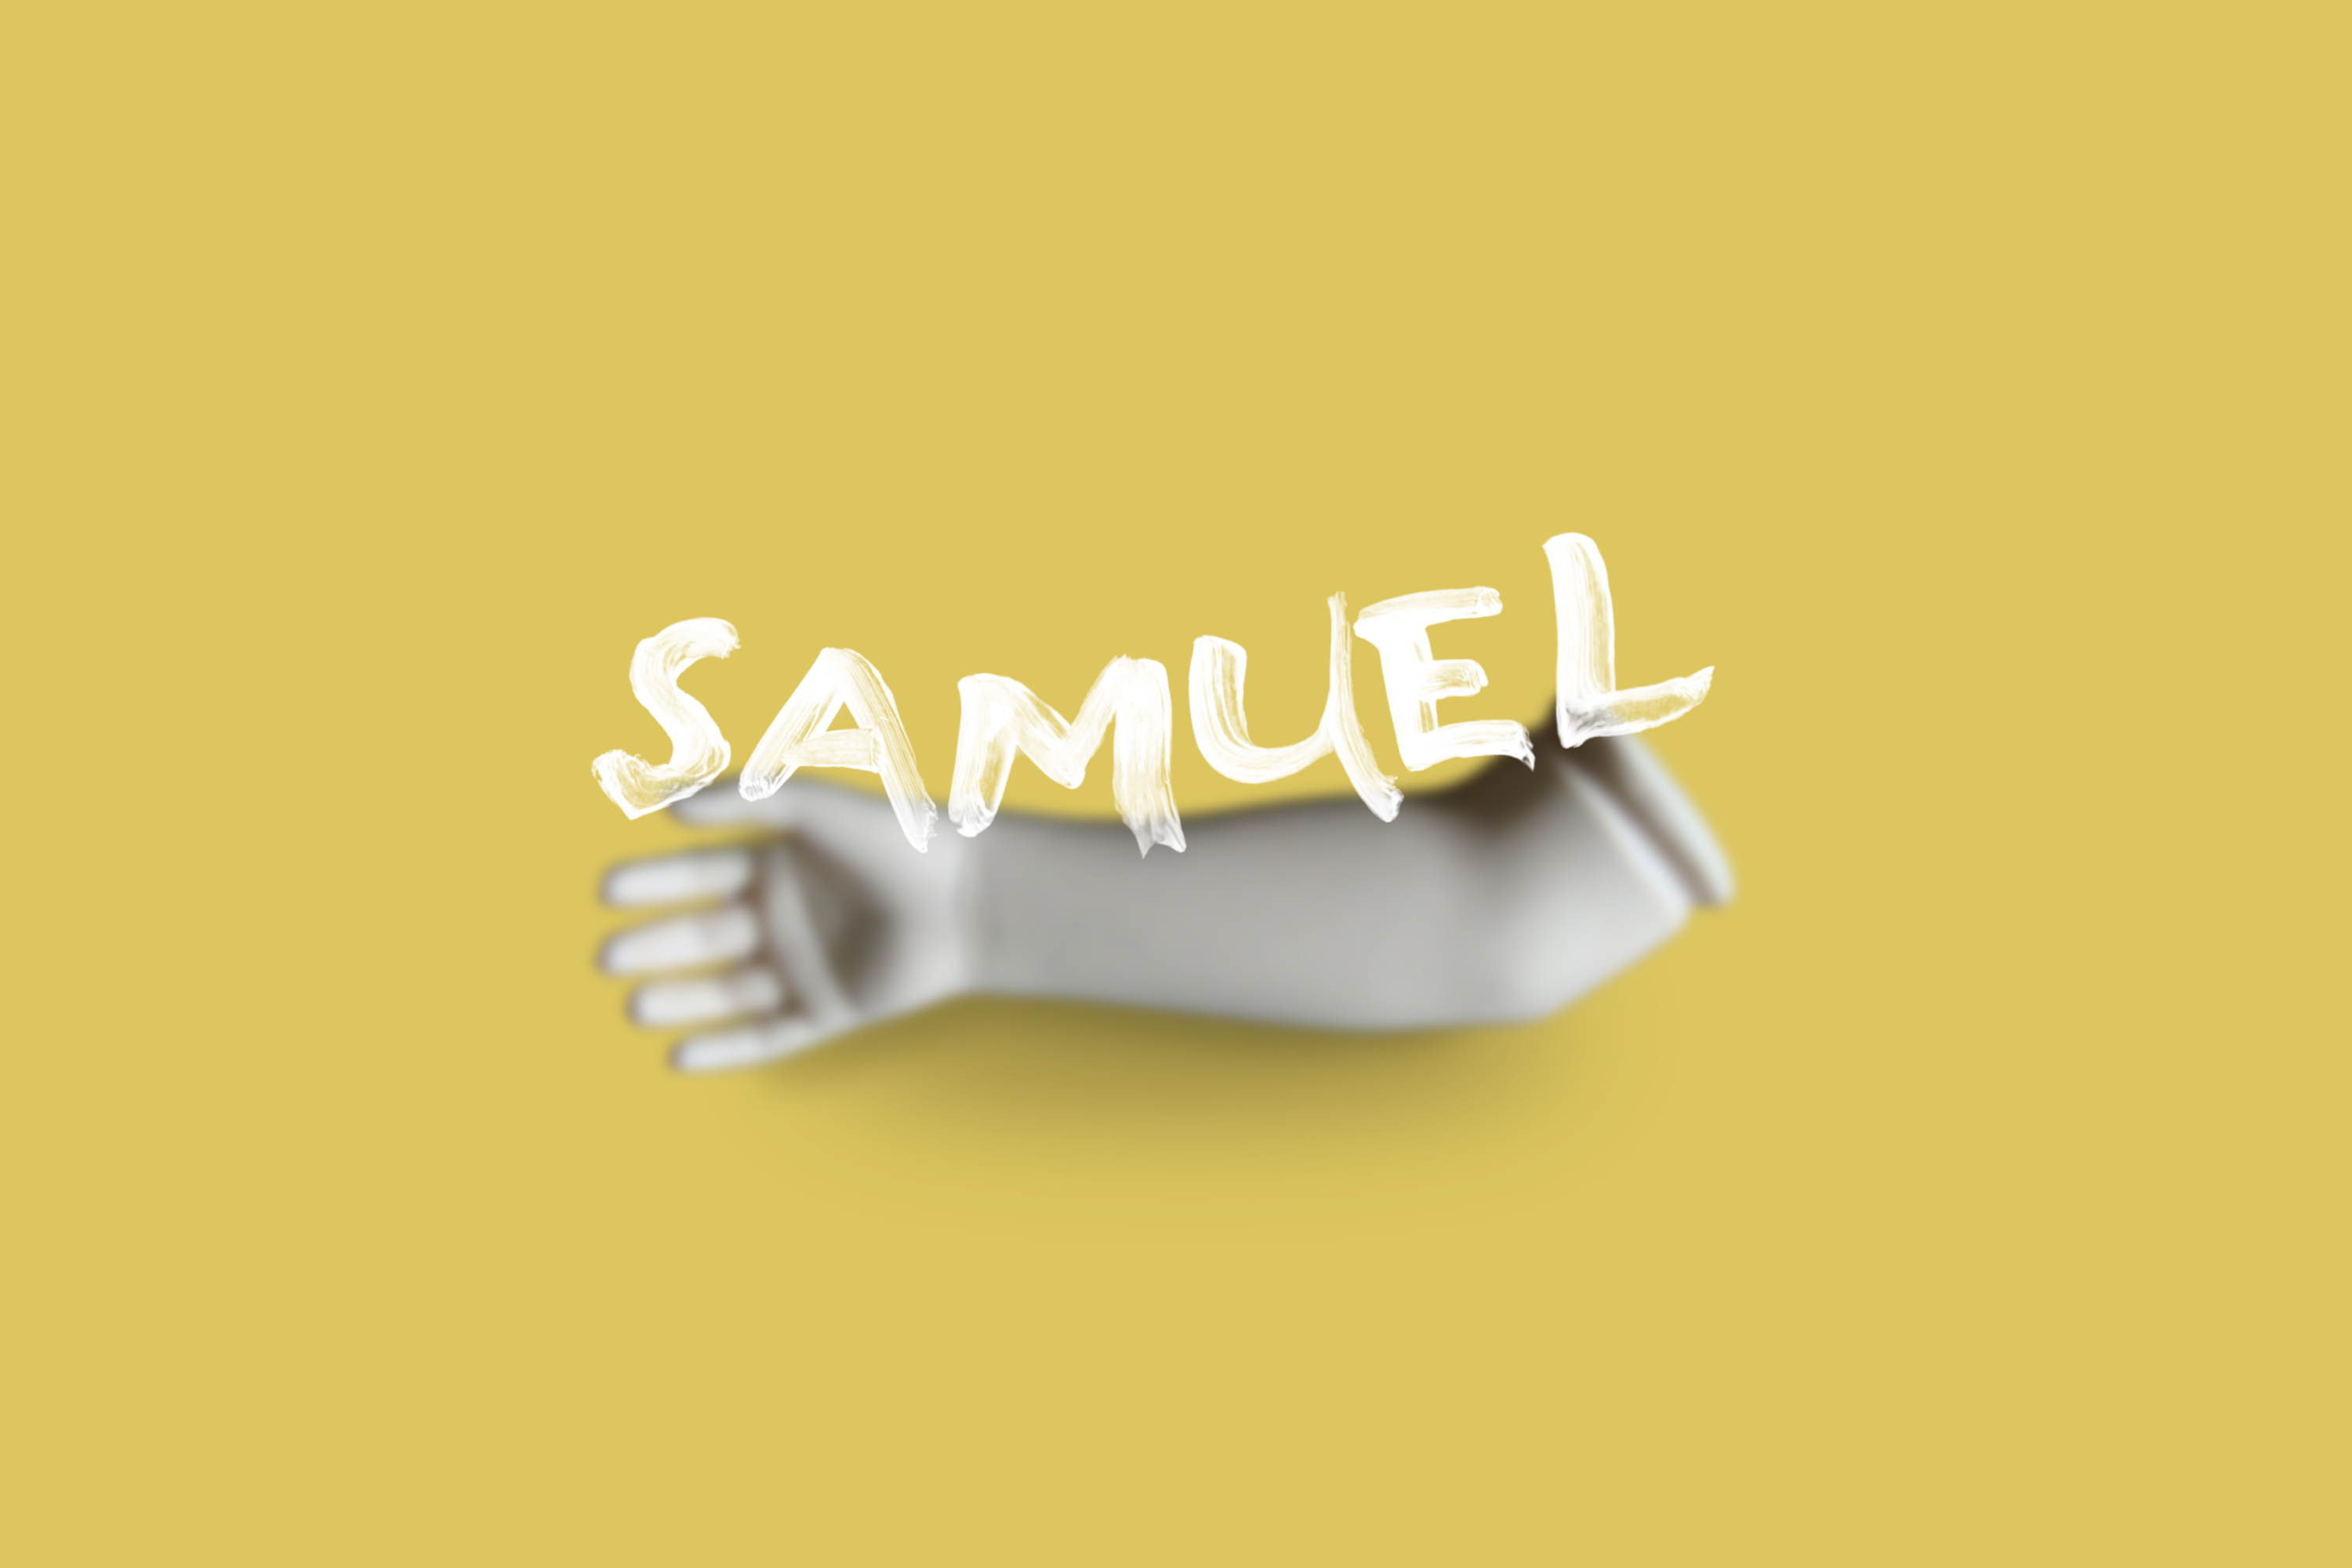 Samuel - a new play by Alexis Roblan, directed by Dara Malina